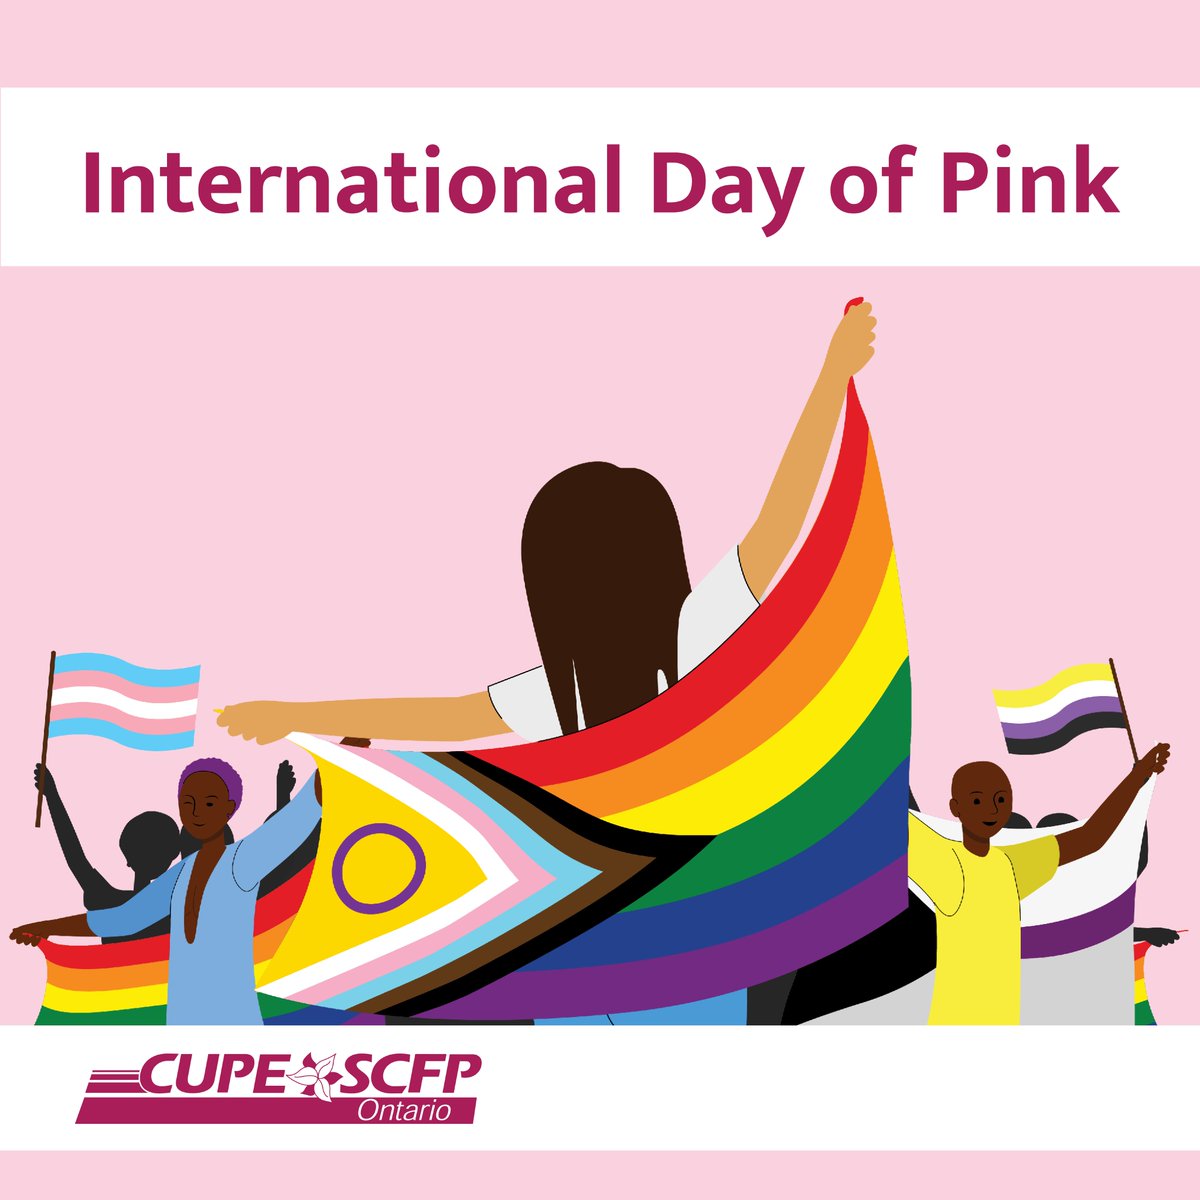 This year's theme for the Day of Pink is: Visibility! We're celebrating visibility in all its forms – being seen, acknowledged, respected, and listened to. It's about standing tall and embracing our true selves! Learn more on being involved today here: dayofpink.org/en/home-2023